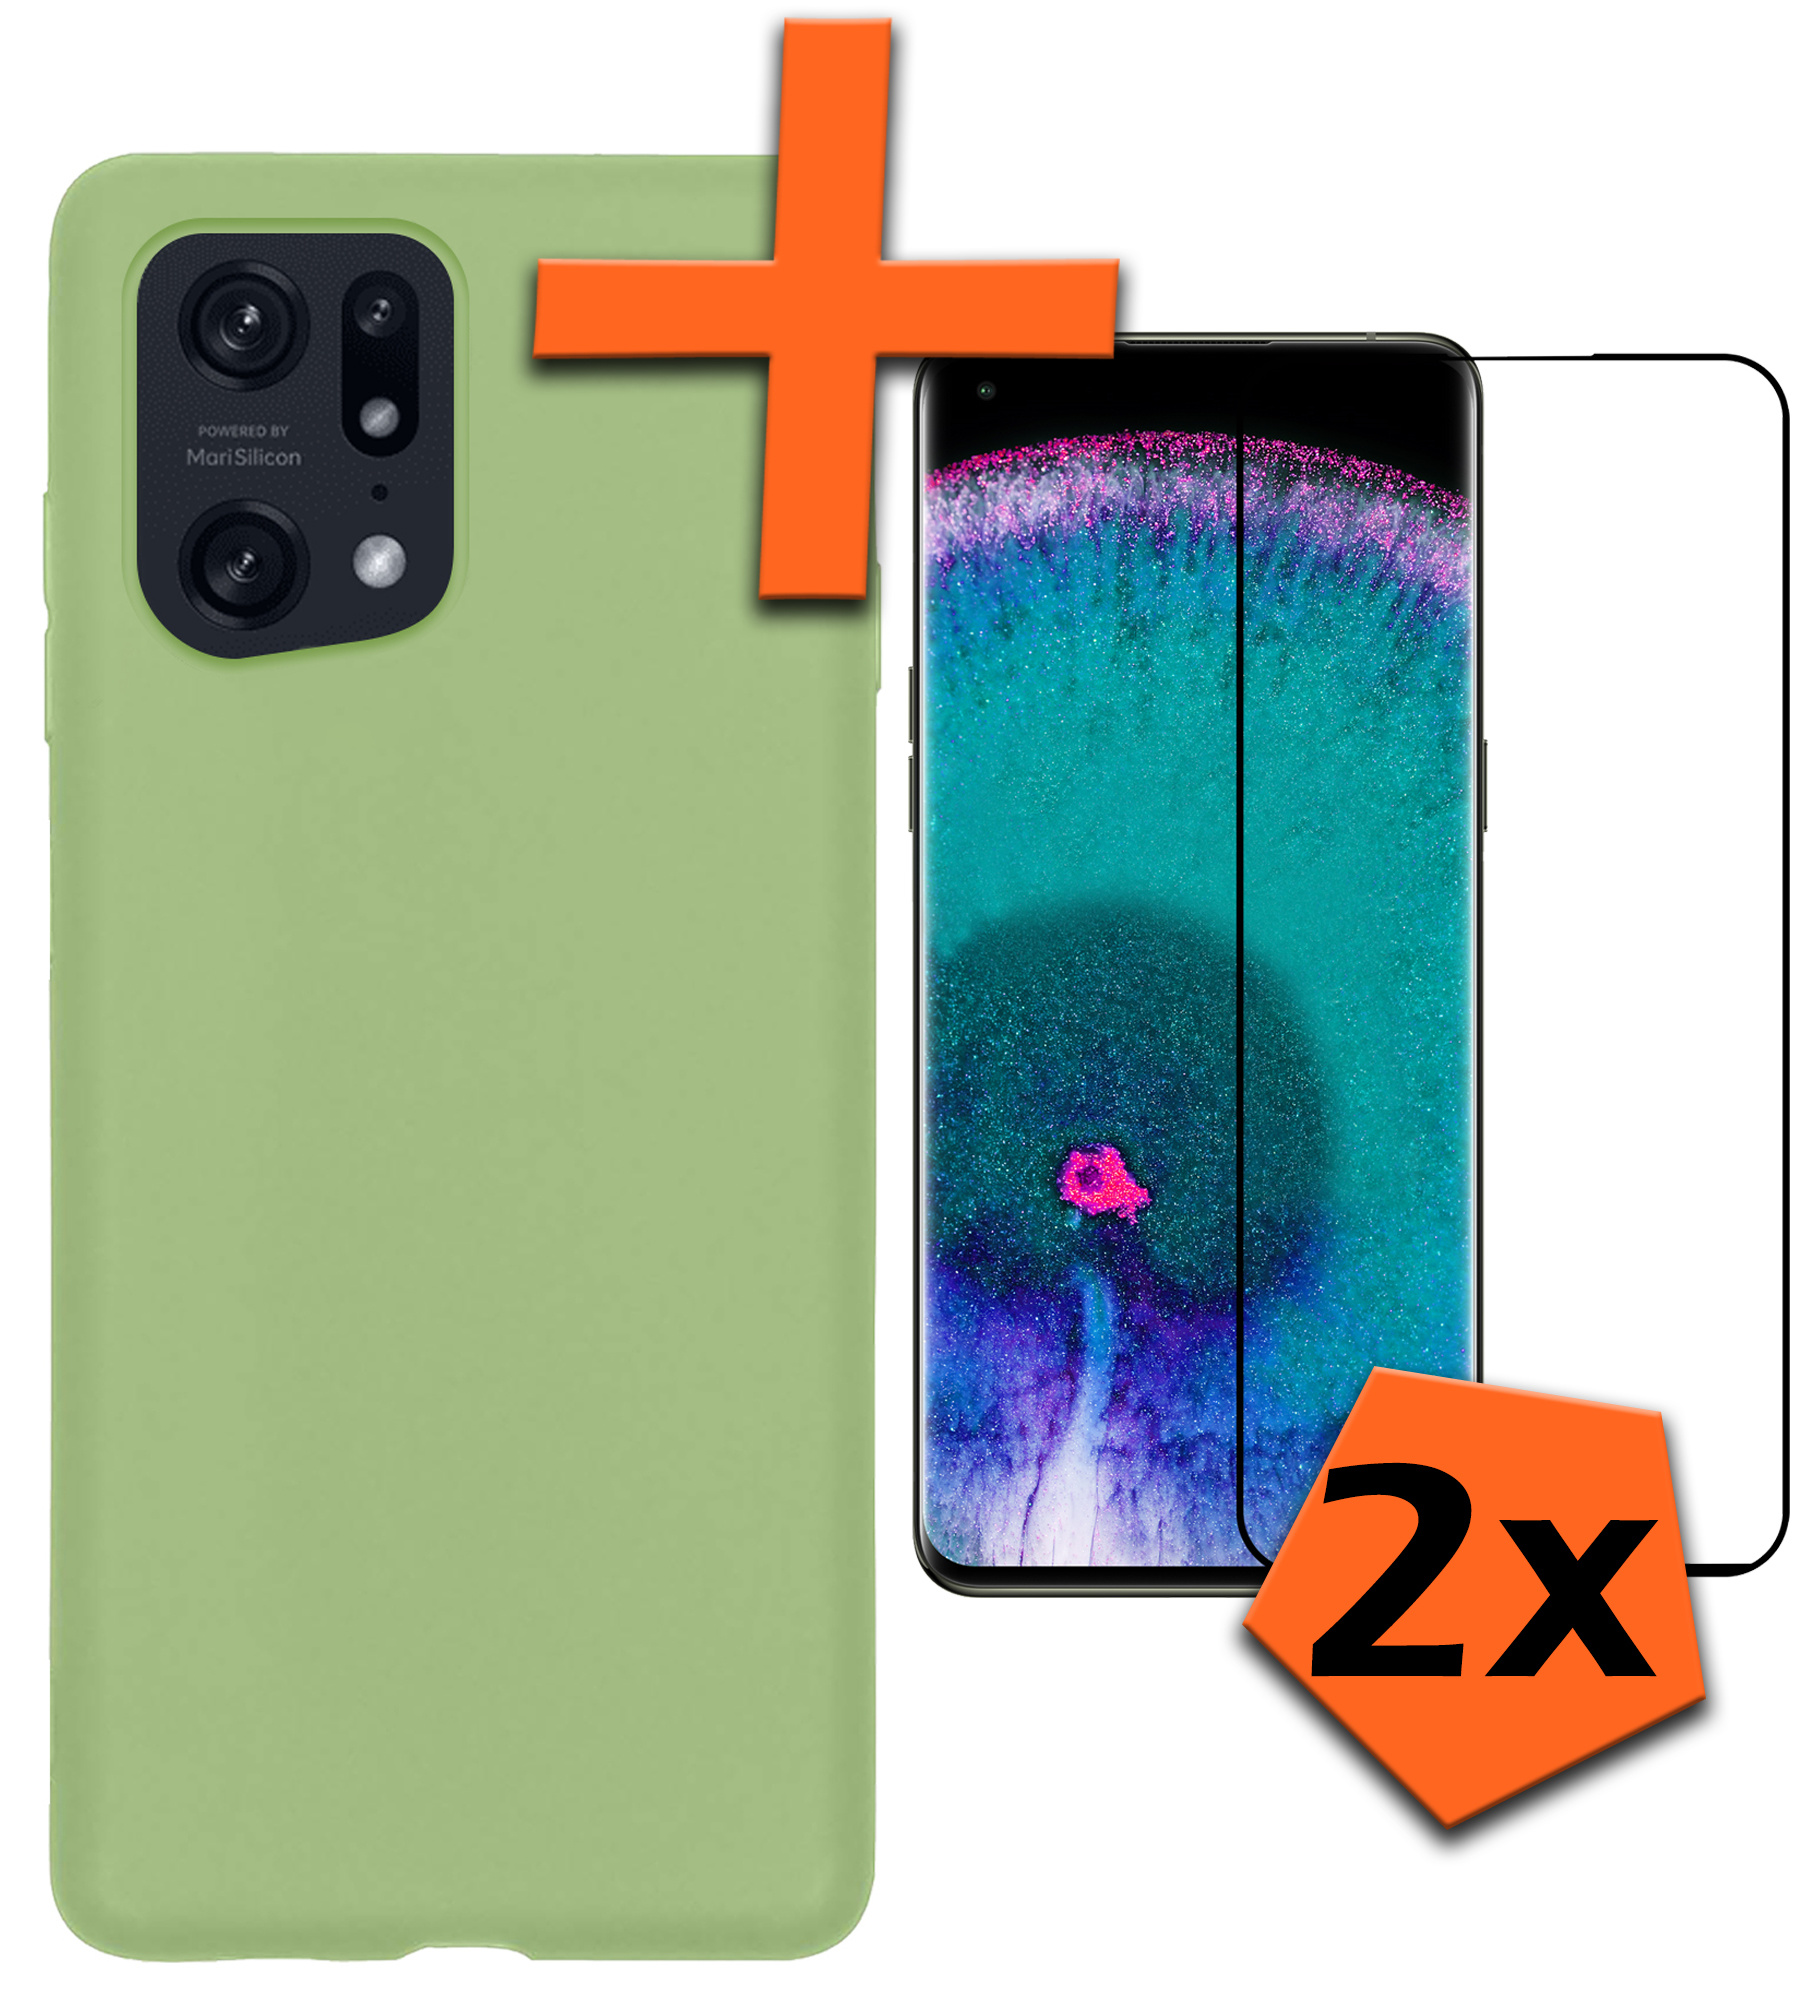 Nomfy OPPO Find X5 Pro Hoesje Siliconen Case Back Cover Met 2x Screenprotector - OPPO Find X5 Pro Hoes Cover Silicone - Groen